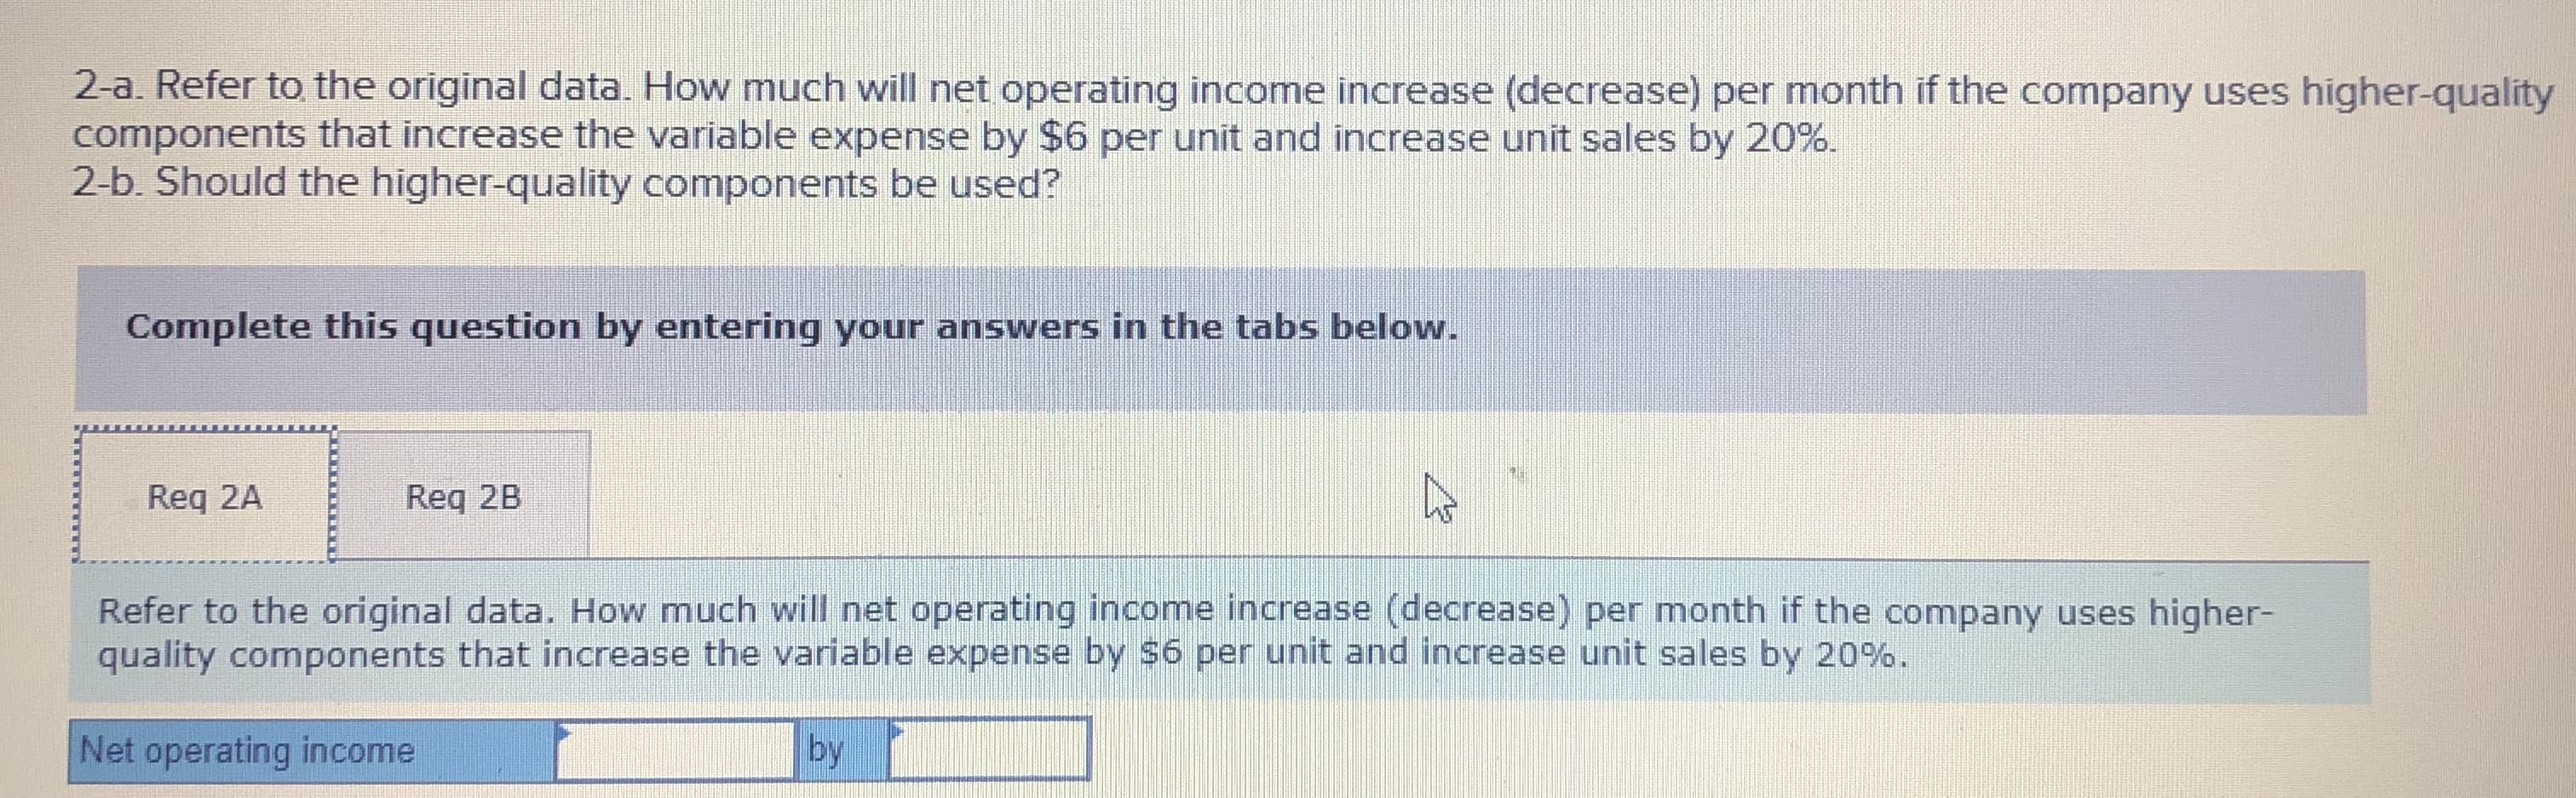 2-a. Refer to the original data. How much will net operating income increase (decrease) per month if the company uses higher-quality
components that increase the variable expense by $6 per unit and increase unit sales by 20%.
2-b. Should the higher-quality components be used?
Complete this question by entering your answers in the tabs below.
Req 2A
Req 2B
Refer to the original data. How much will net operating income increase (decrease) per month if the company uses higher-
quality components that increase the variable expense by $6 per unit and increase unit sales by 20%.
Net operating income
by
